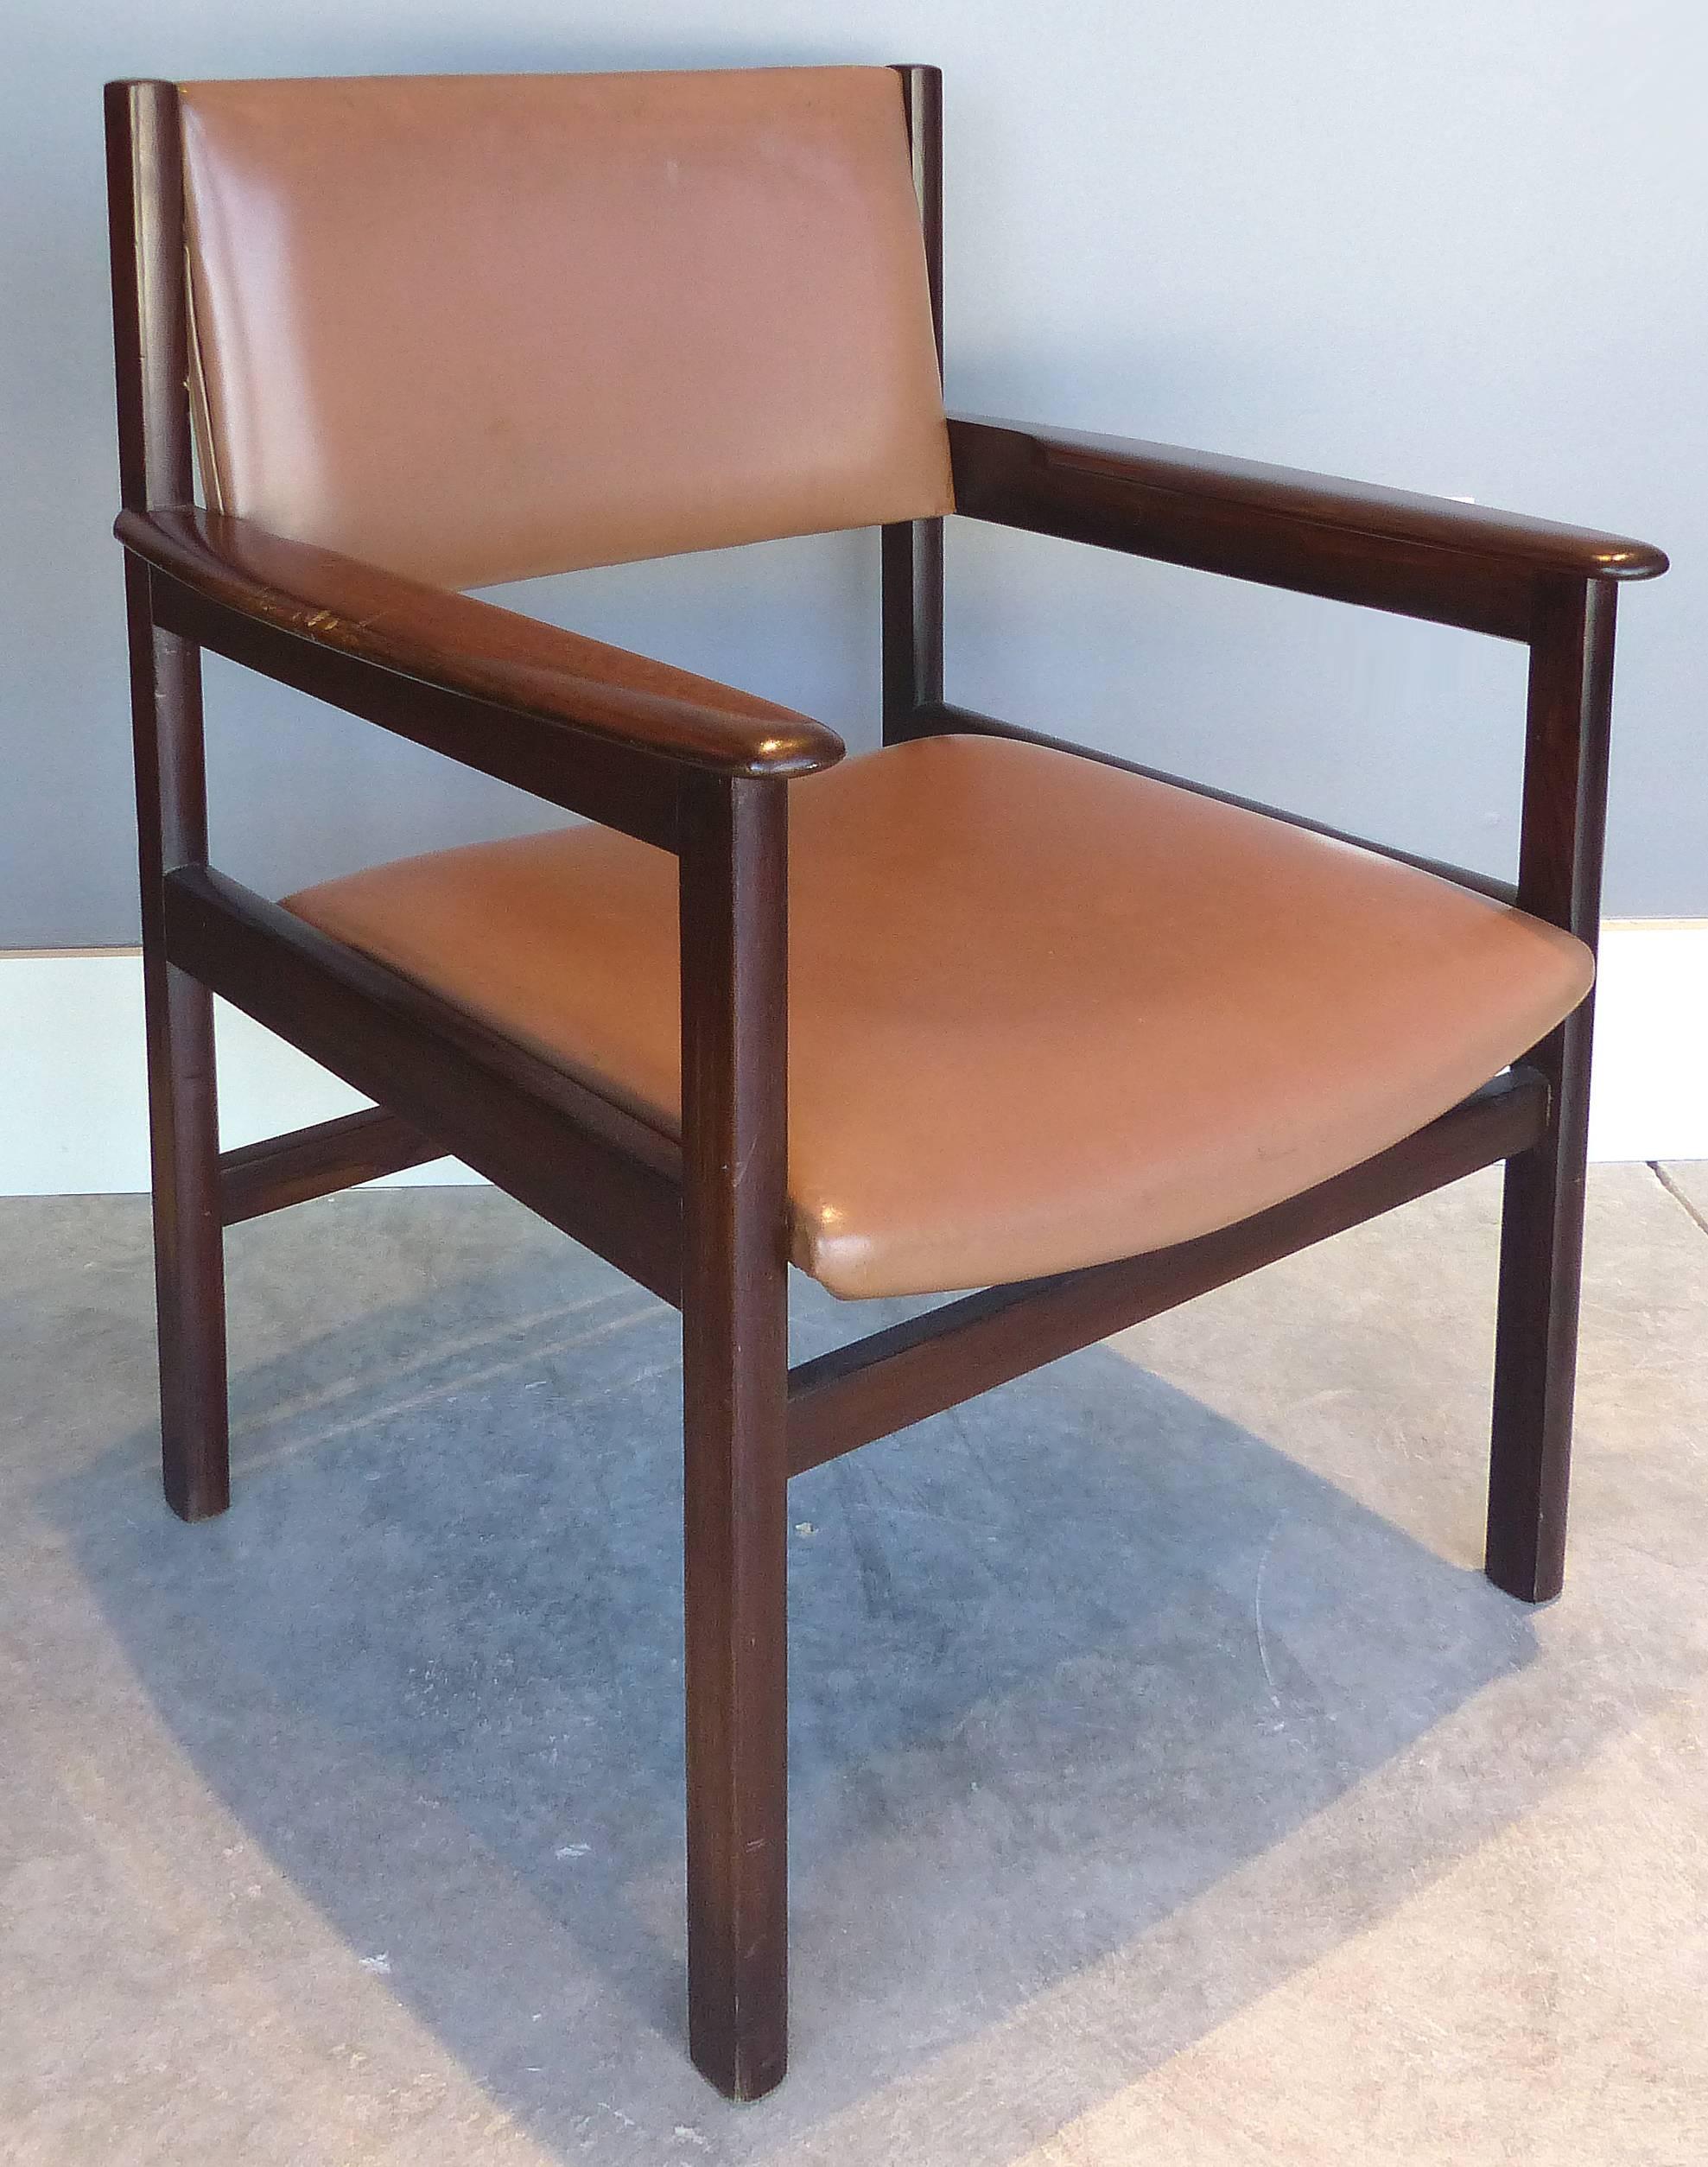 Sergio Rodrigues OCA  Jacaranda Wood  Armchairs, Pair

Offered are a pair of 